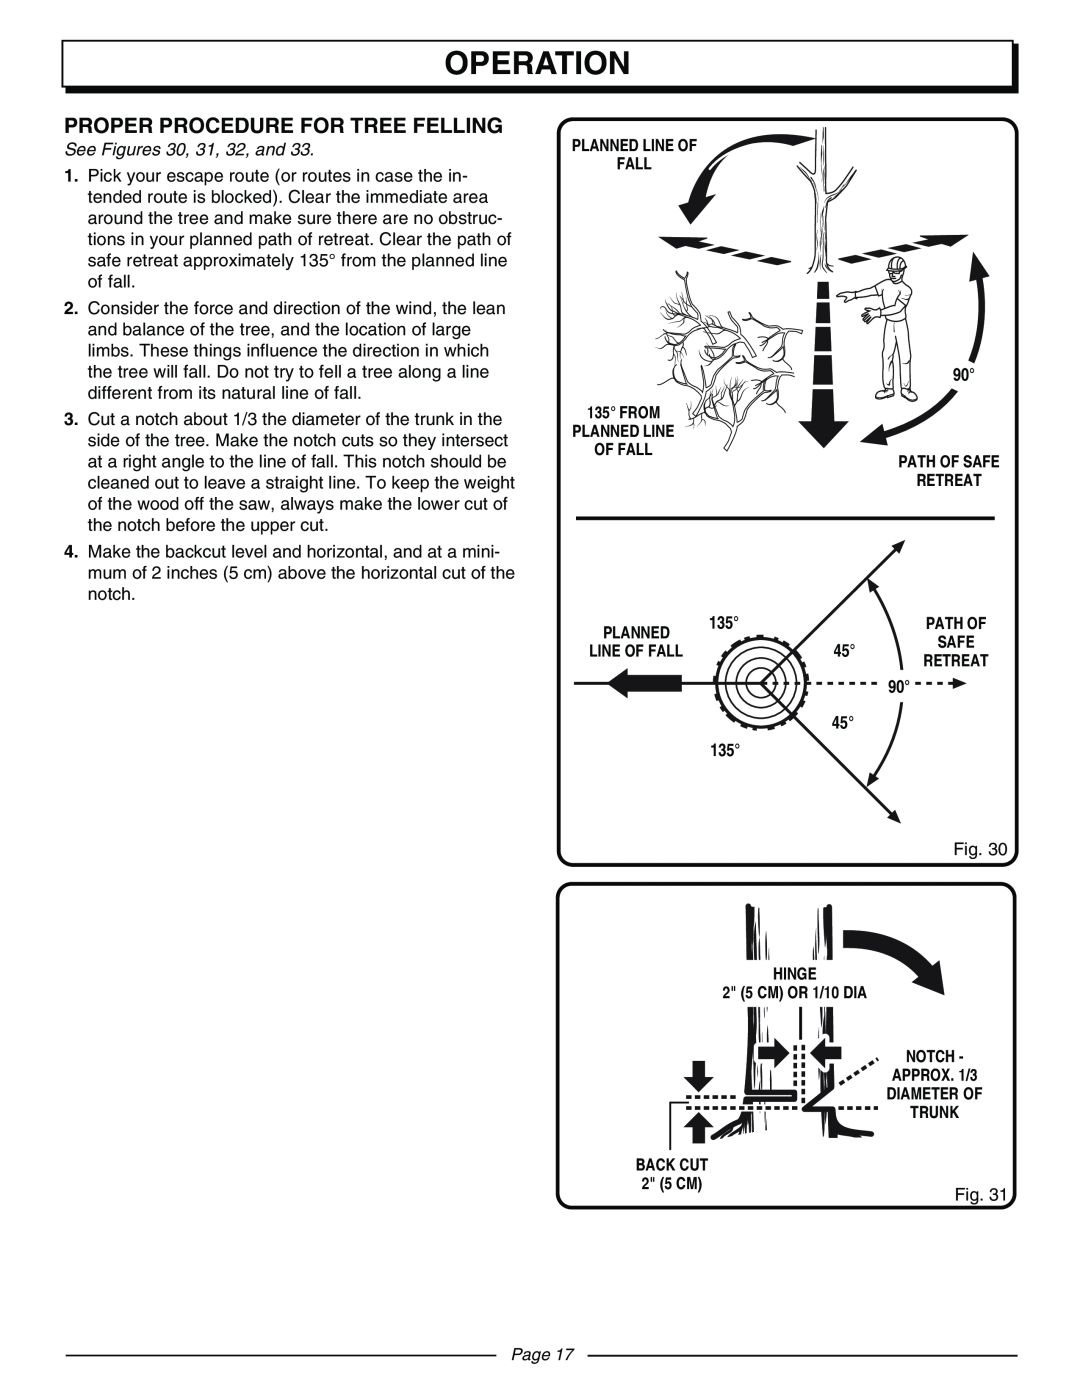 Homelite UT10570 manual Proper Procedure For Tree Felling, Operation, See Figures 30, 31, 32, and, Page 